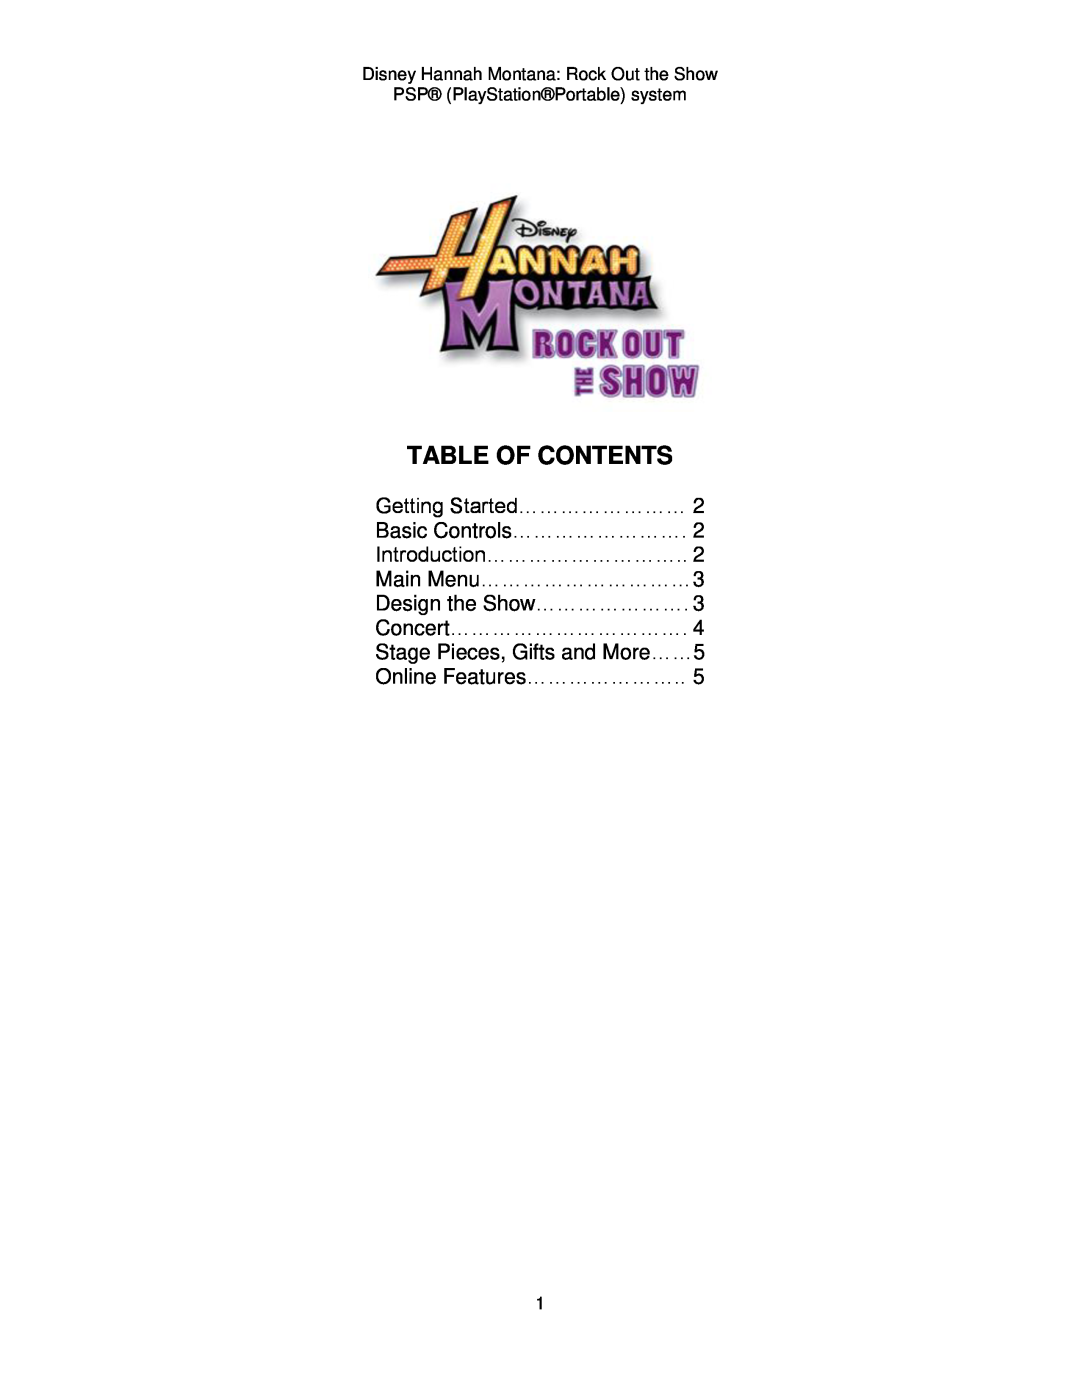 Disney Interactive Studios Hannah Montana: Rock Out the Show manual Table Of Contents, PSP PlayStationPortable system 